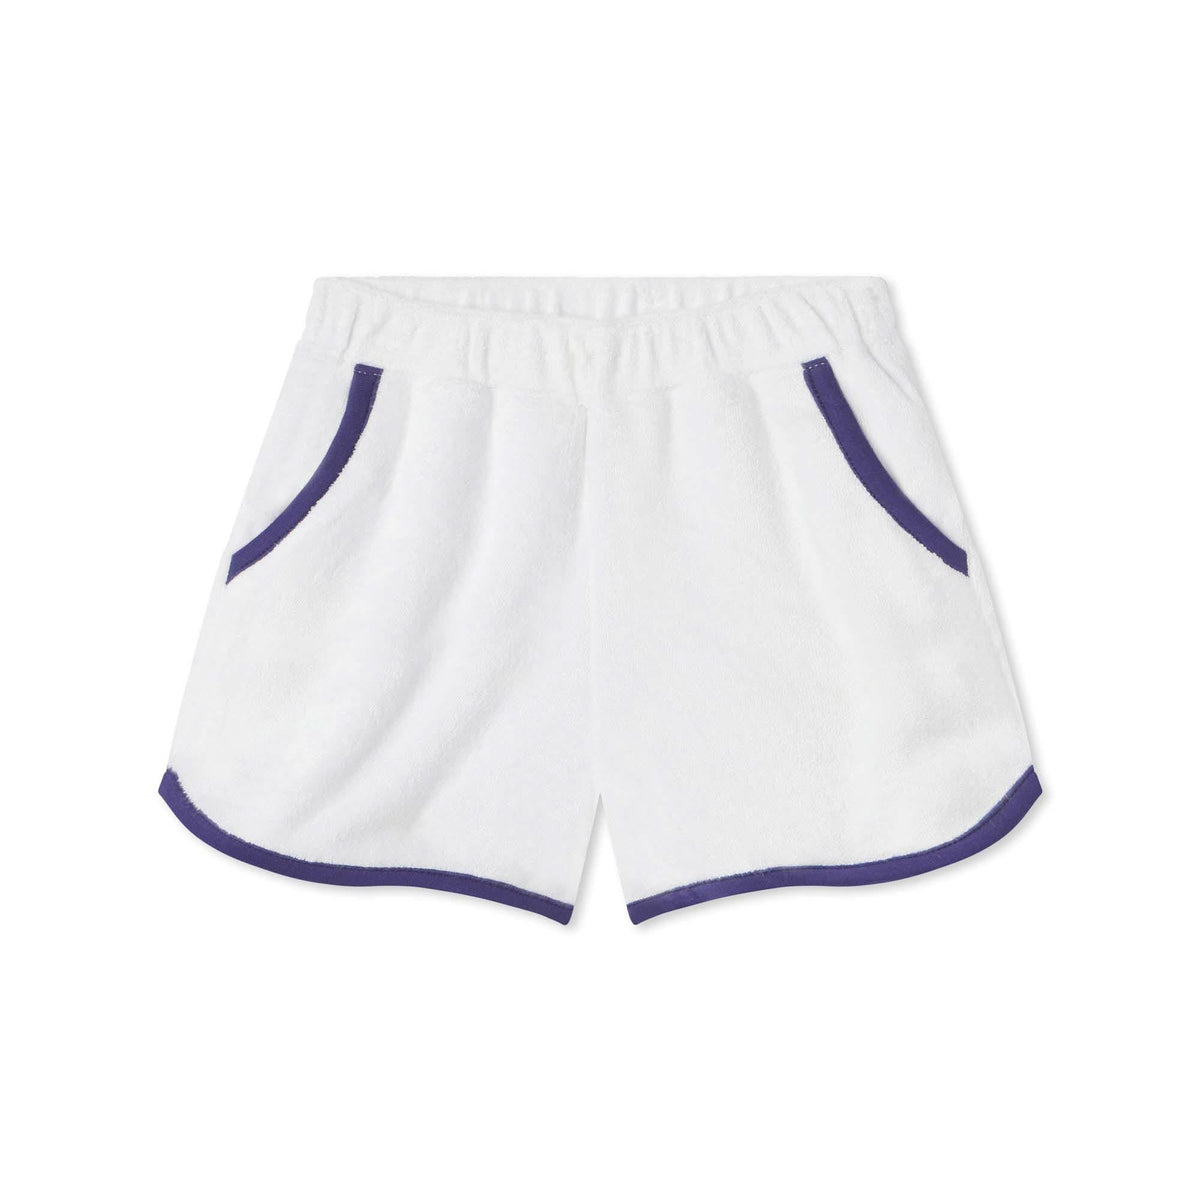 Classic and Preppy Fiona Knit Short, Bright White Looped Terry-Bottoms-Bright White with Blue Ribbon-XS (2-3T)-CPC - Classic Prep Childrenswear